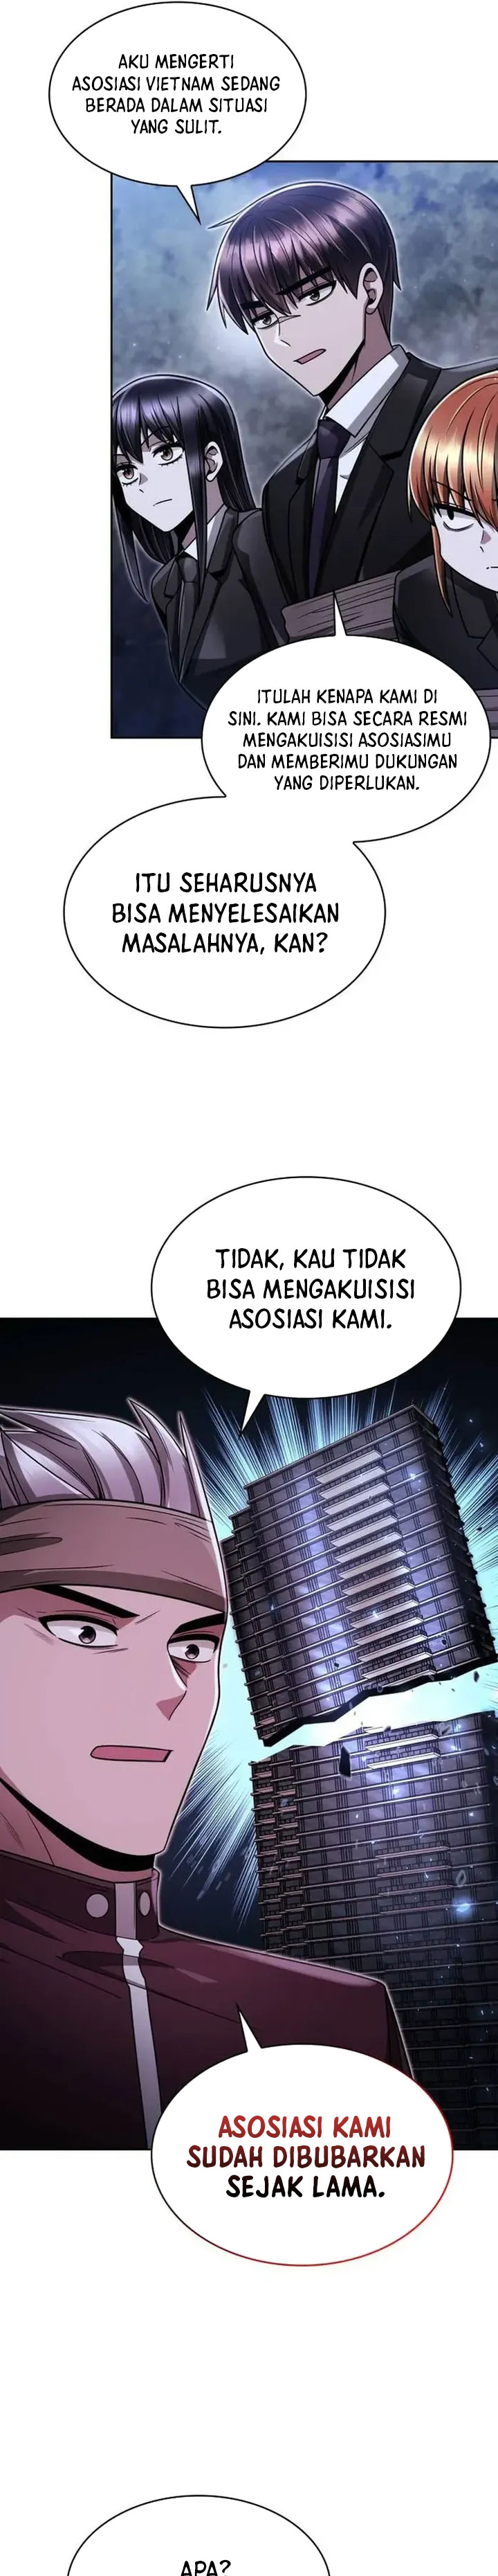 Dilarang COPAS - situs resmi www.mangacanblog.com - Komik clever cleaning life of the returned genius hunter 058 - chapter 58 59 Indonesia clever cleaning life of the returned genius hunter 058 - chapter 58 Terbaru 25|Baca Manga Komik Indonesia|Mangacan